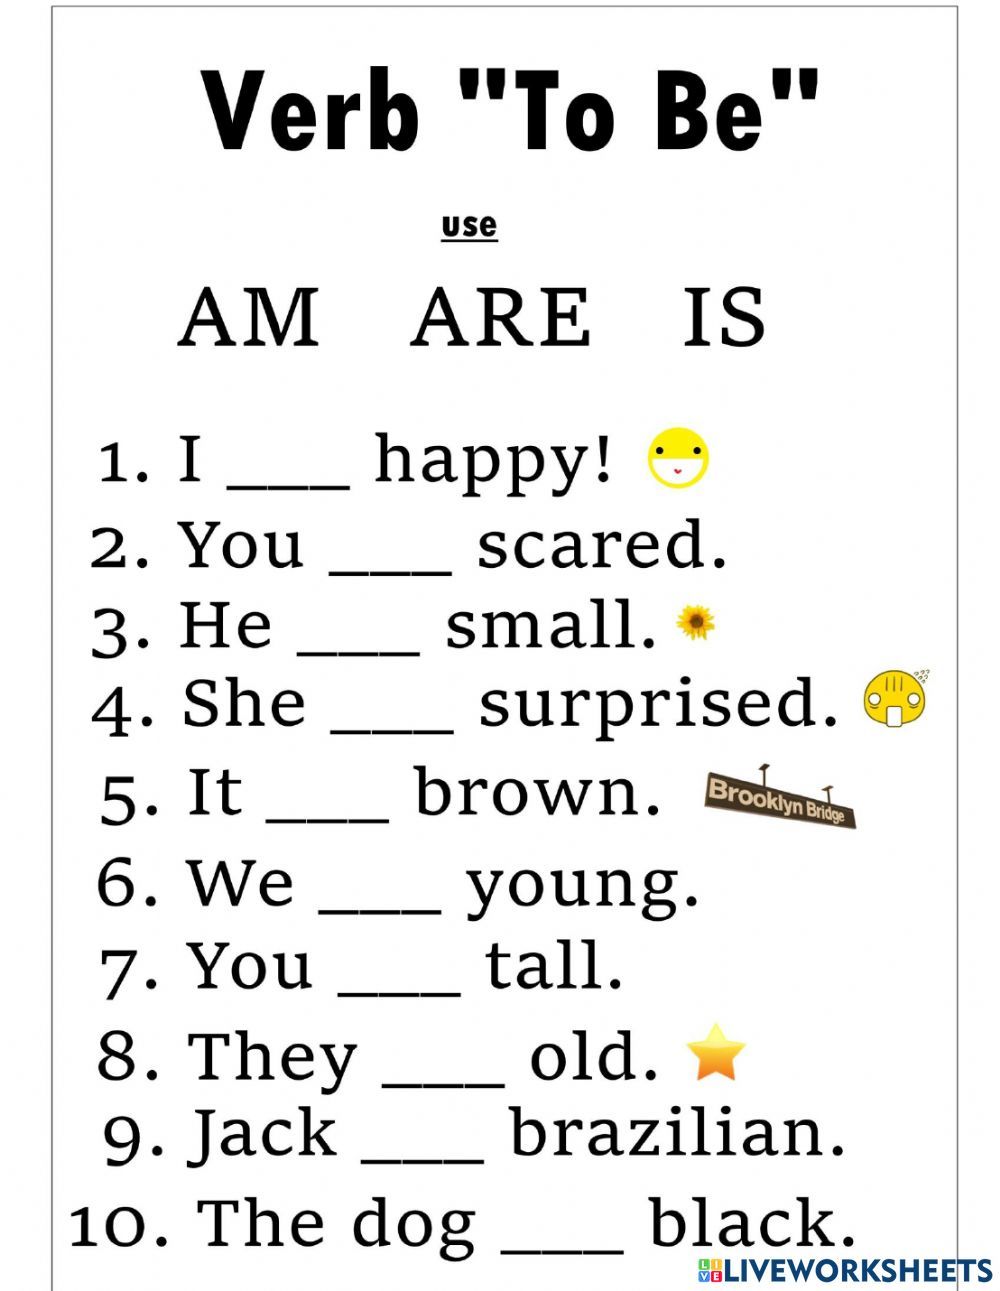 Verb To Be online exercise for Grade 2